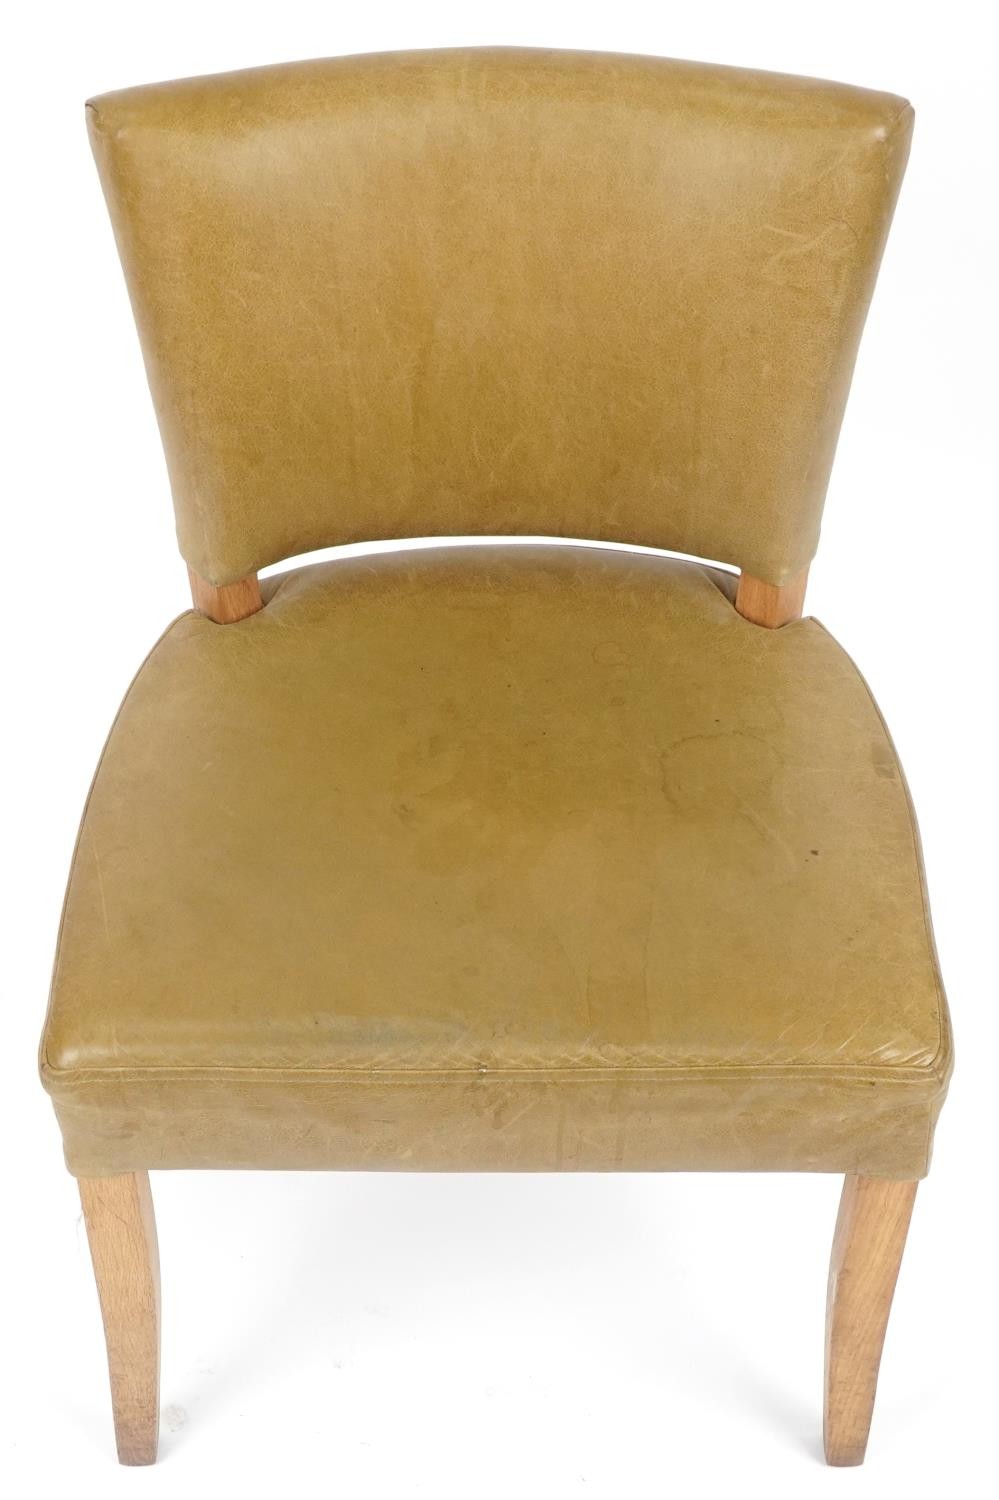 Wych Wood Design, contemporary light oak chair with green leather upholstery, 87cm high - Image 3 of 4